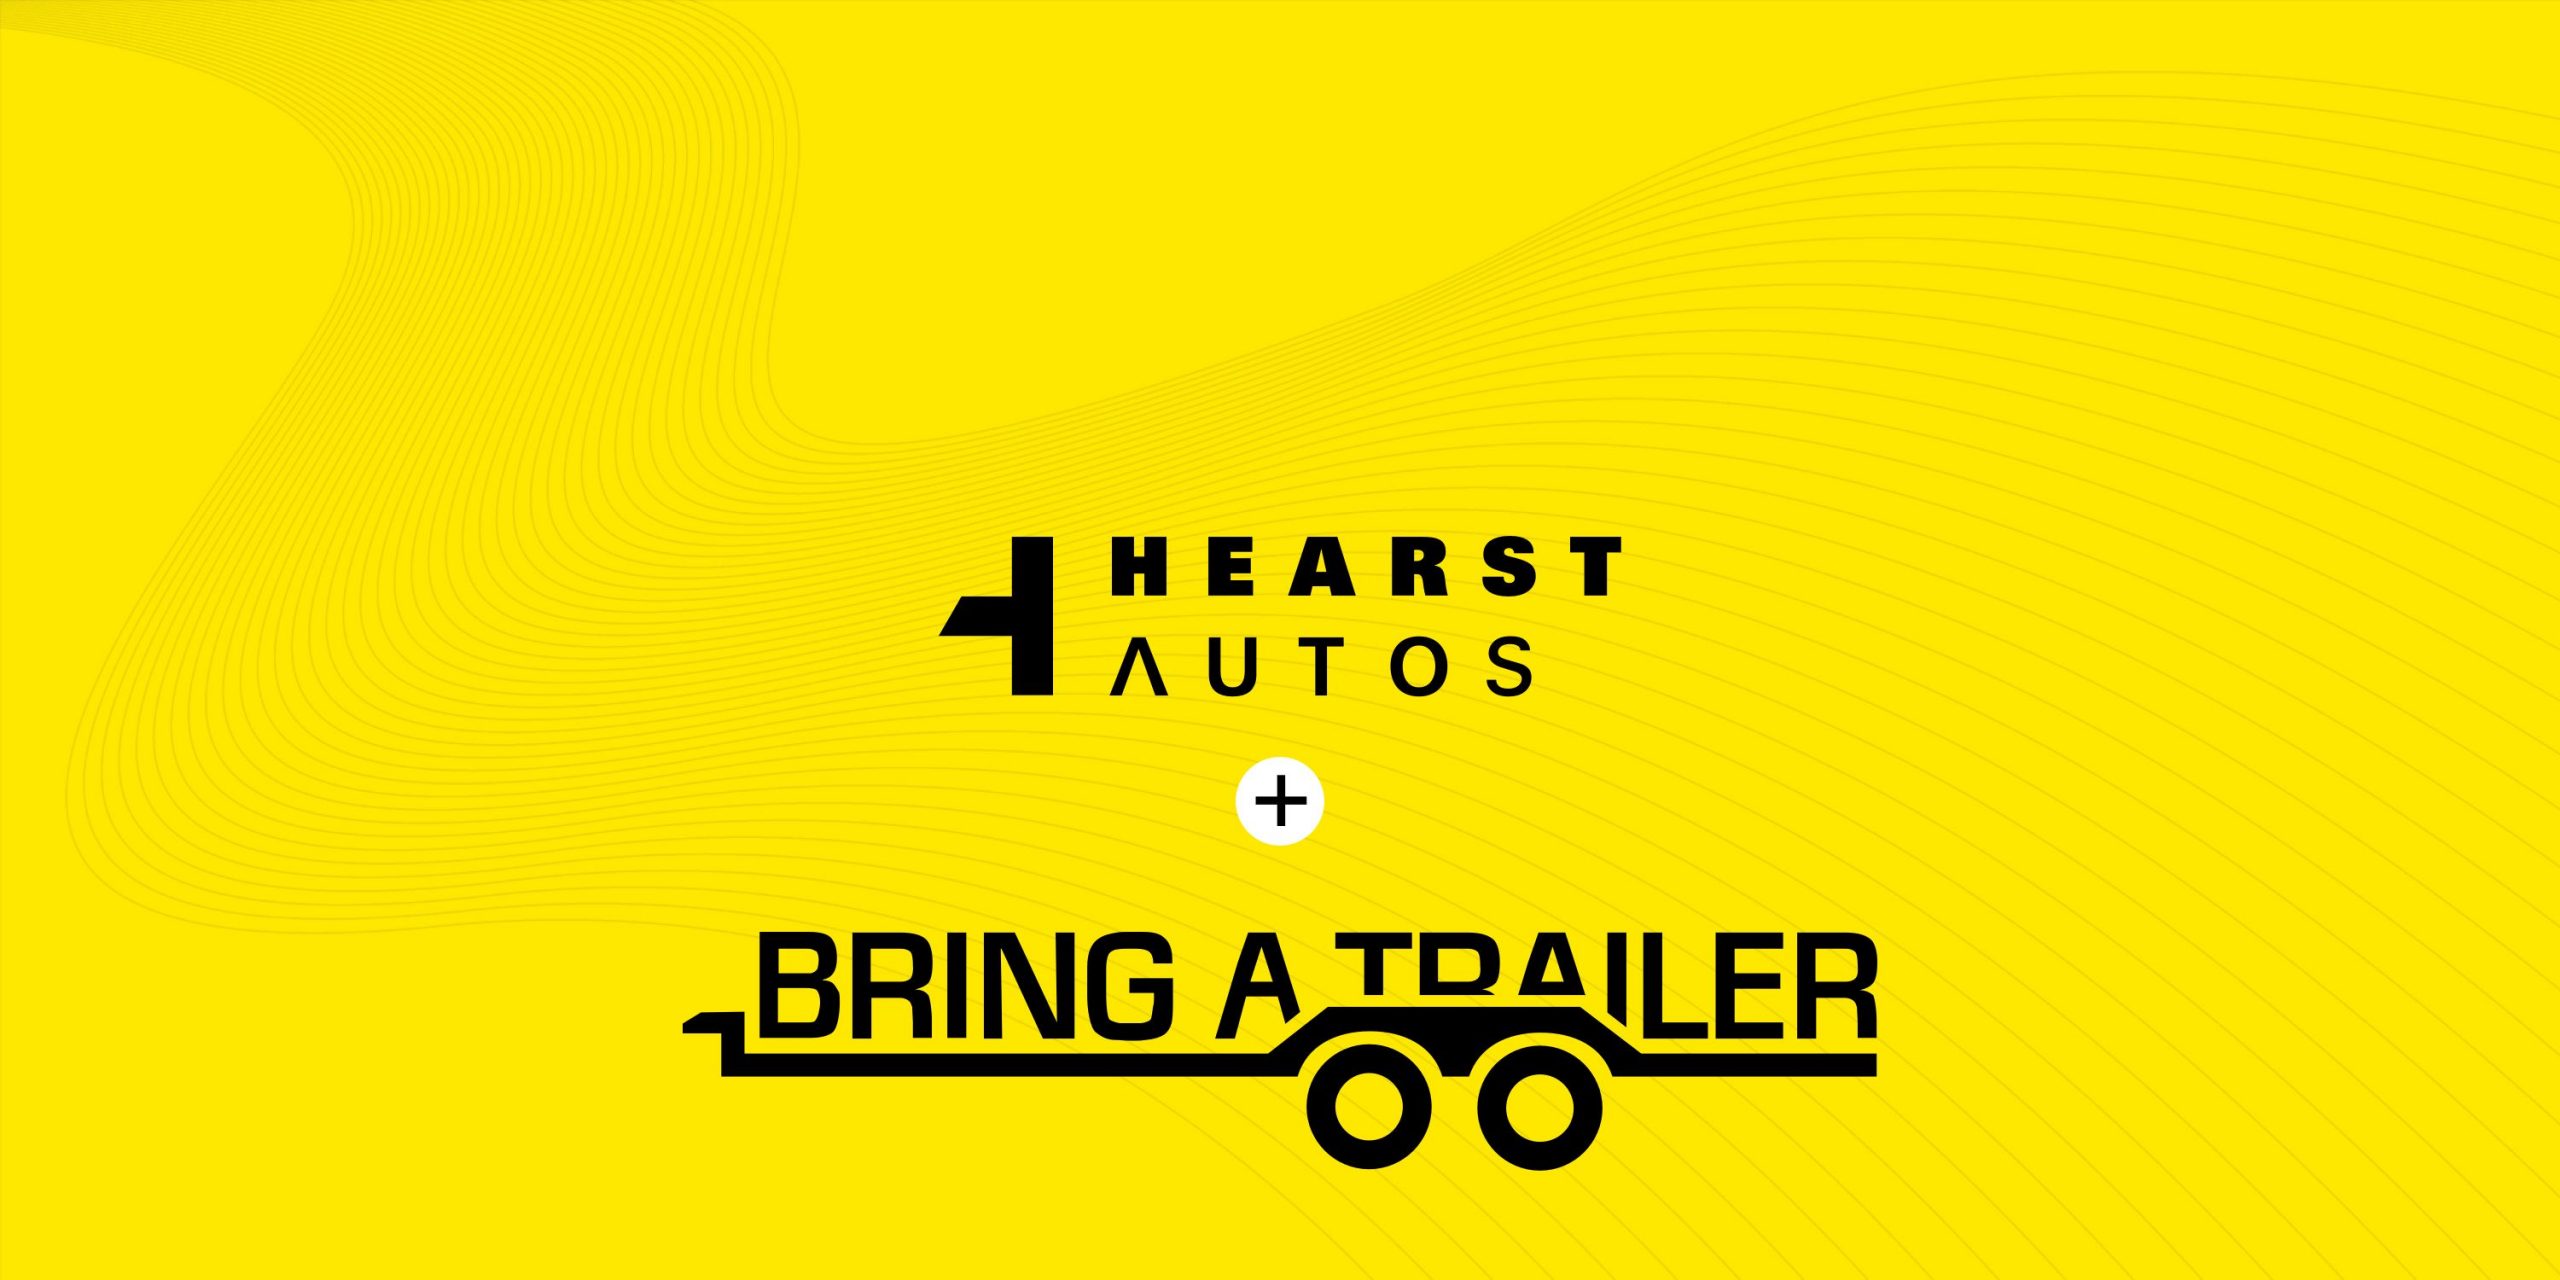 Bring a Trailer’s Online Car Marketplace Joins Hearst Autos